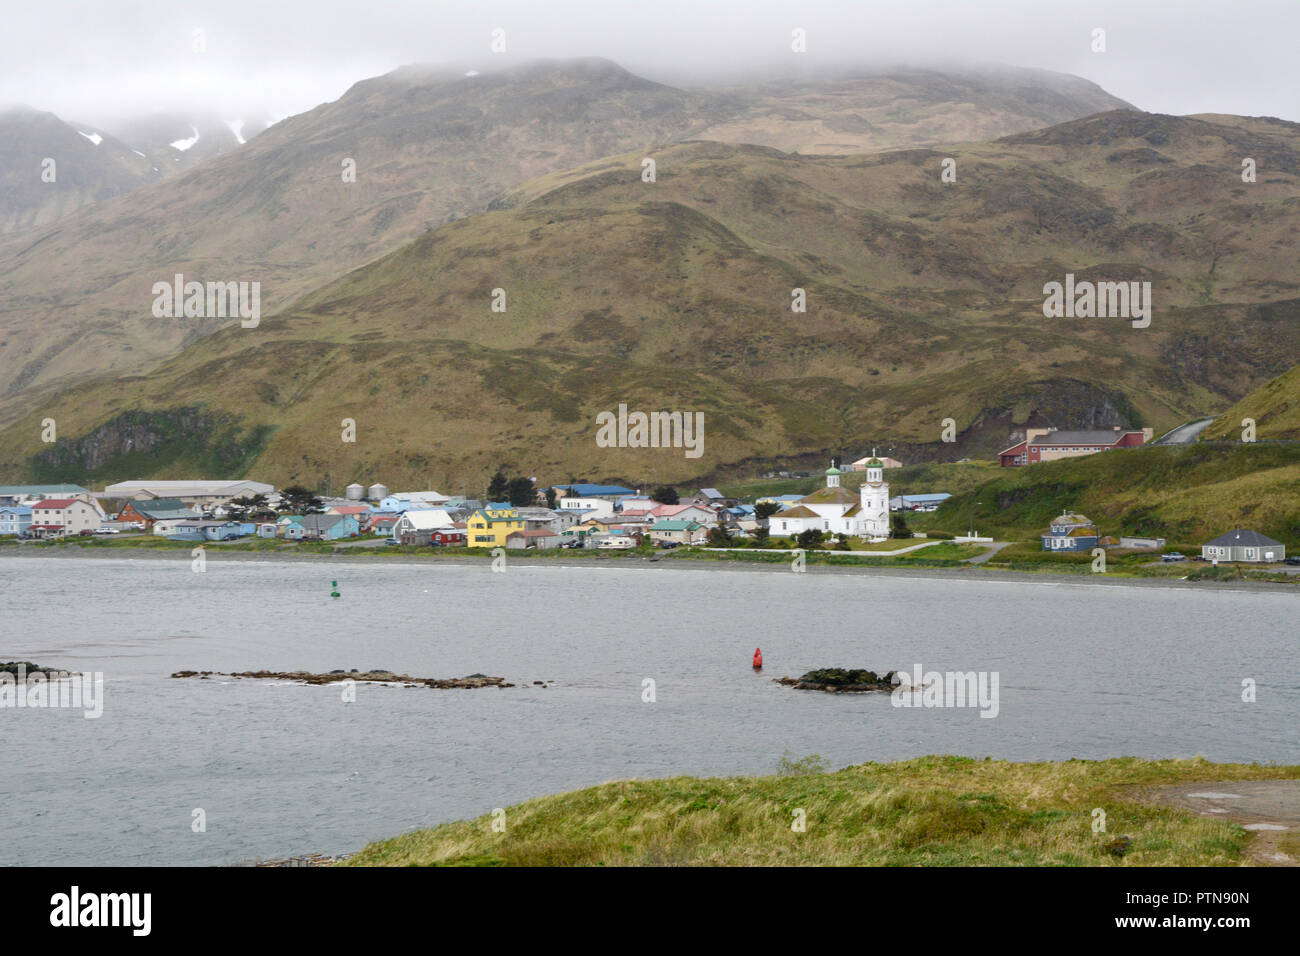 The city of Unalaska, also known as Dutch Harbor, surrounded by mountains and the Bering Sea, on Unalaska Island, Aleutian archipelago, Alaska. Stock Photo